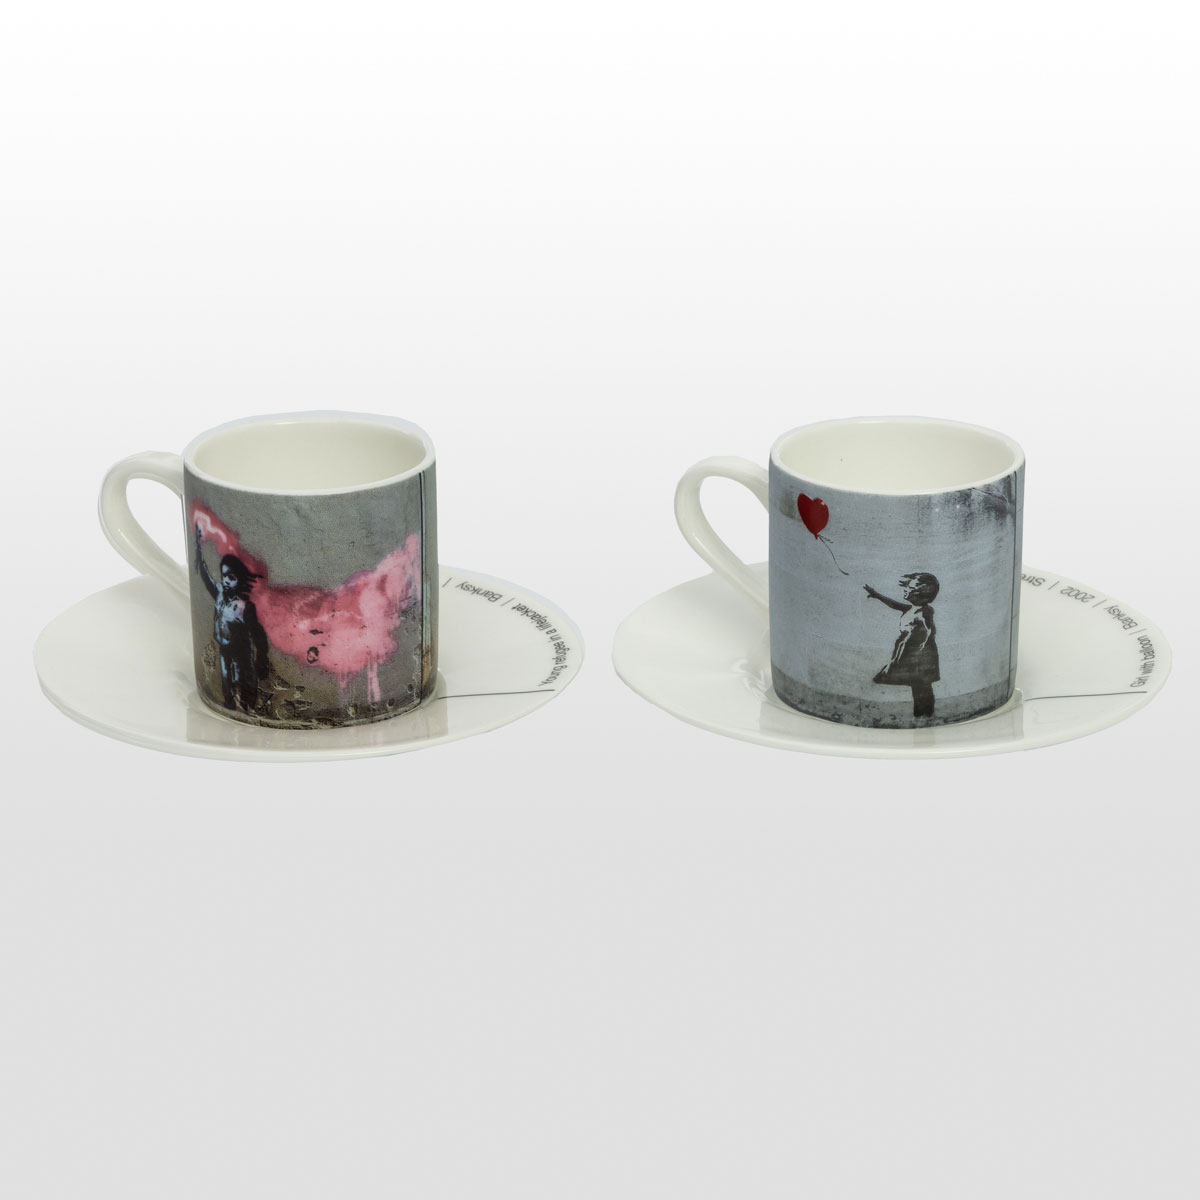 Banksy set of 2 espresso cups and saucers : Jacqueline, The nap (detail 1)